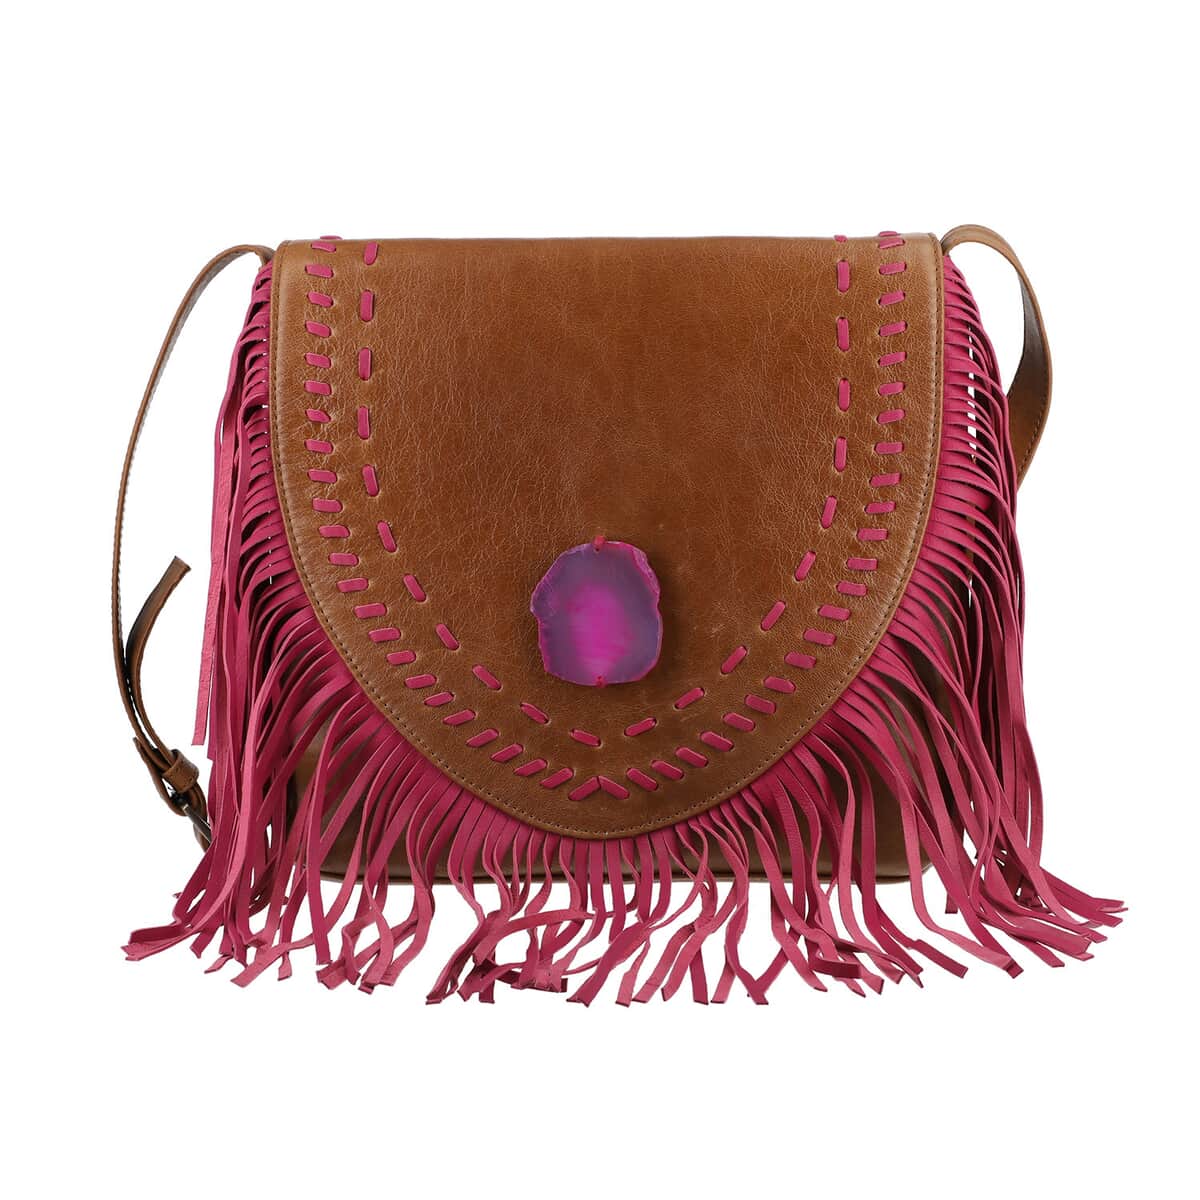 Buy Pink Genuine Leather Fringes Crossbody Bag with Agate Stone at ShopLC.